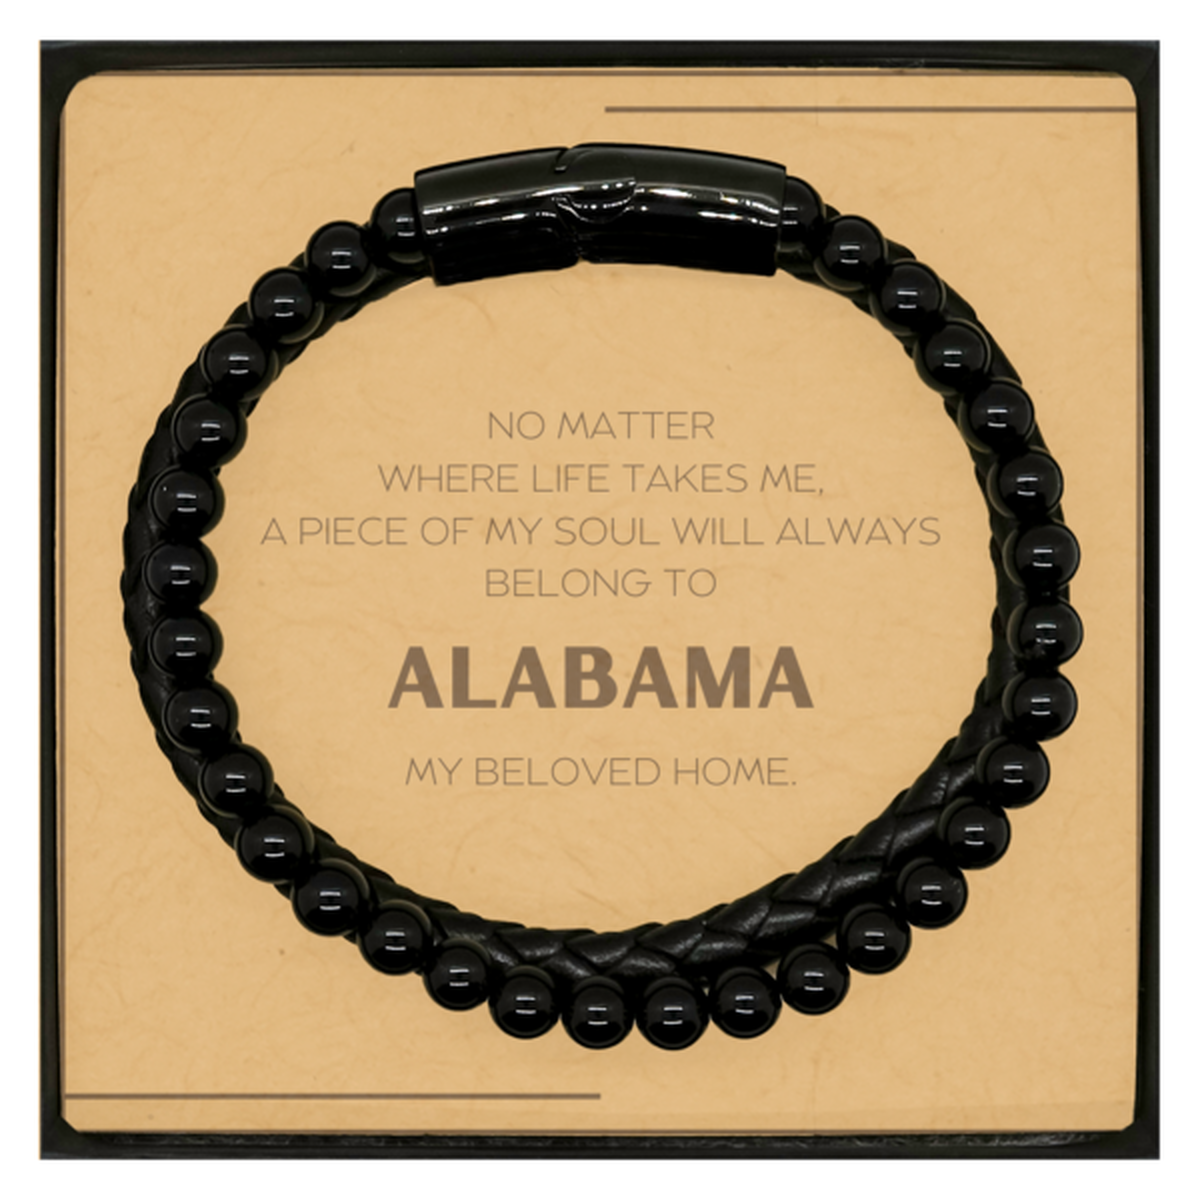 Love Alabama State Gifts, My soul will always belong to Alabama, Proud Stone Leather Bracelets, Birthday Christmas Unique Gifts For Alabama Men, Women, Friends